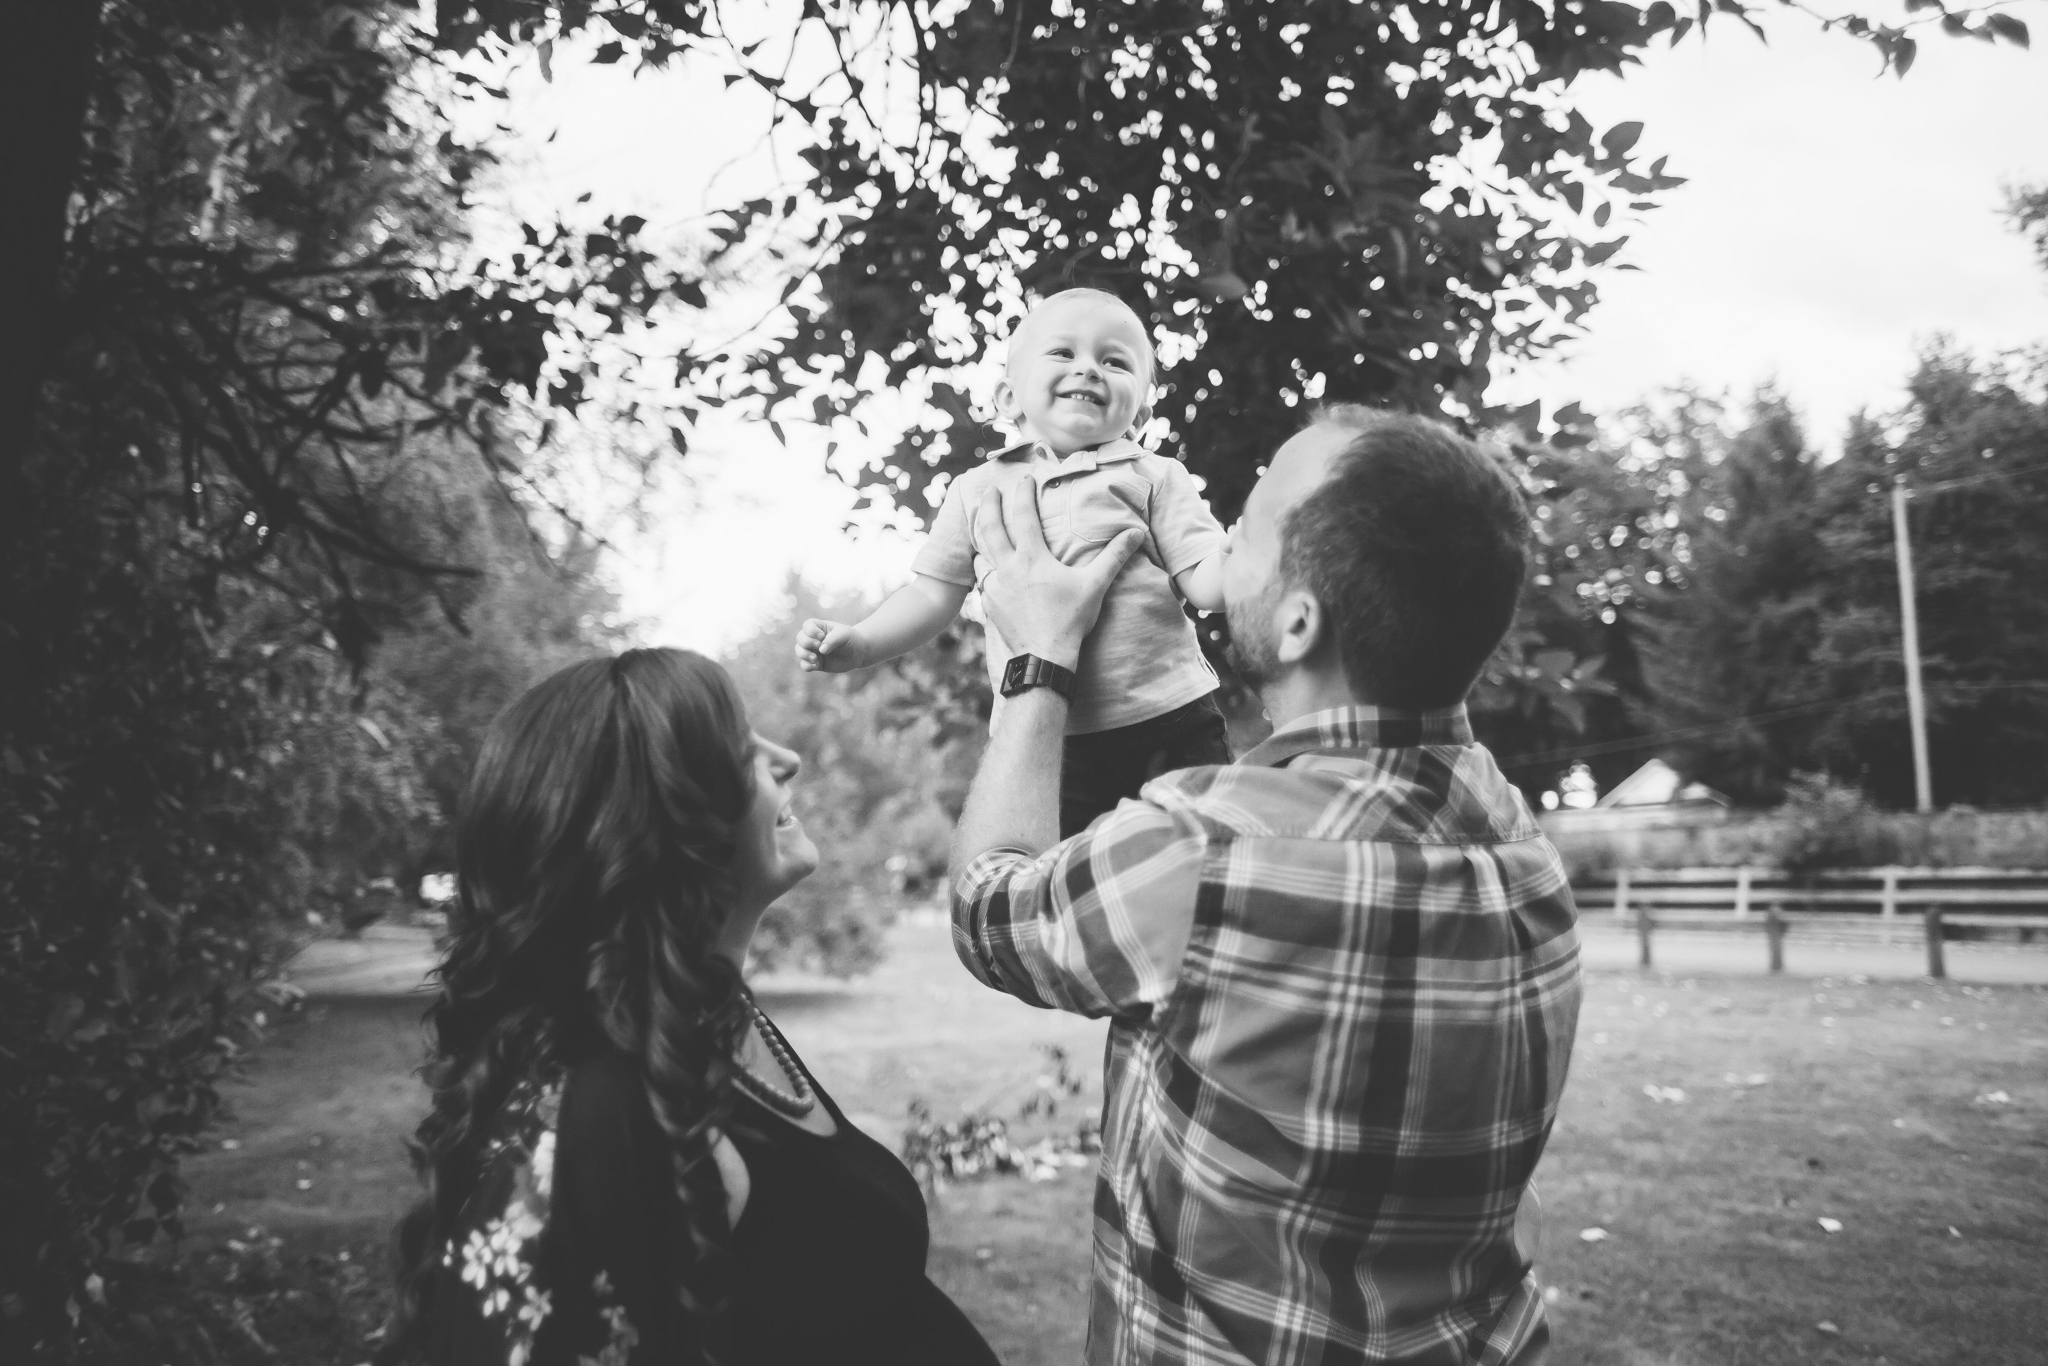 View More: http://michellekarstphotography.pass.us/wilsonfamily2015